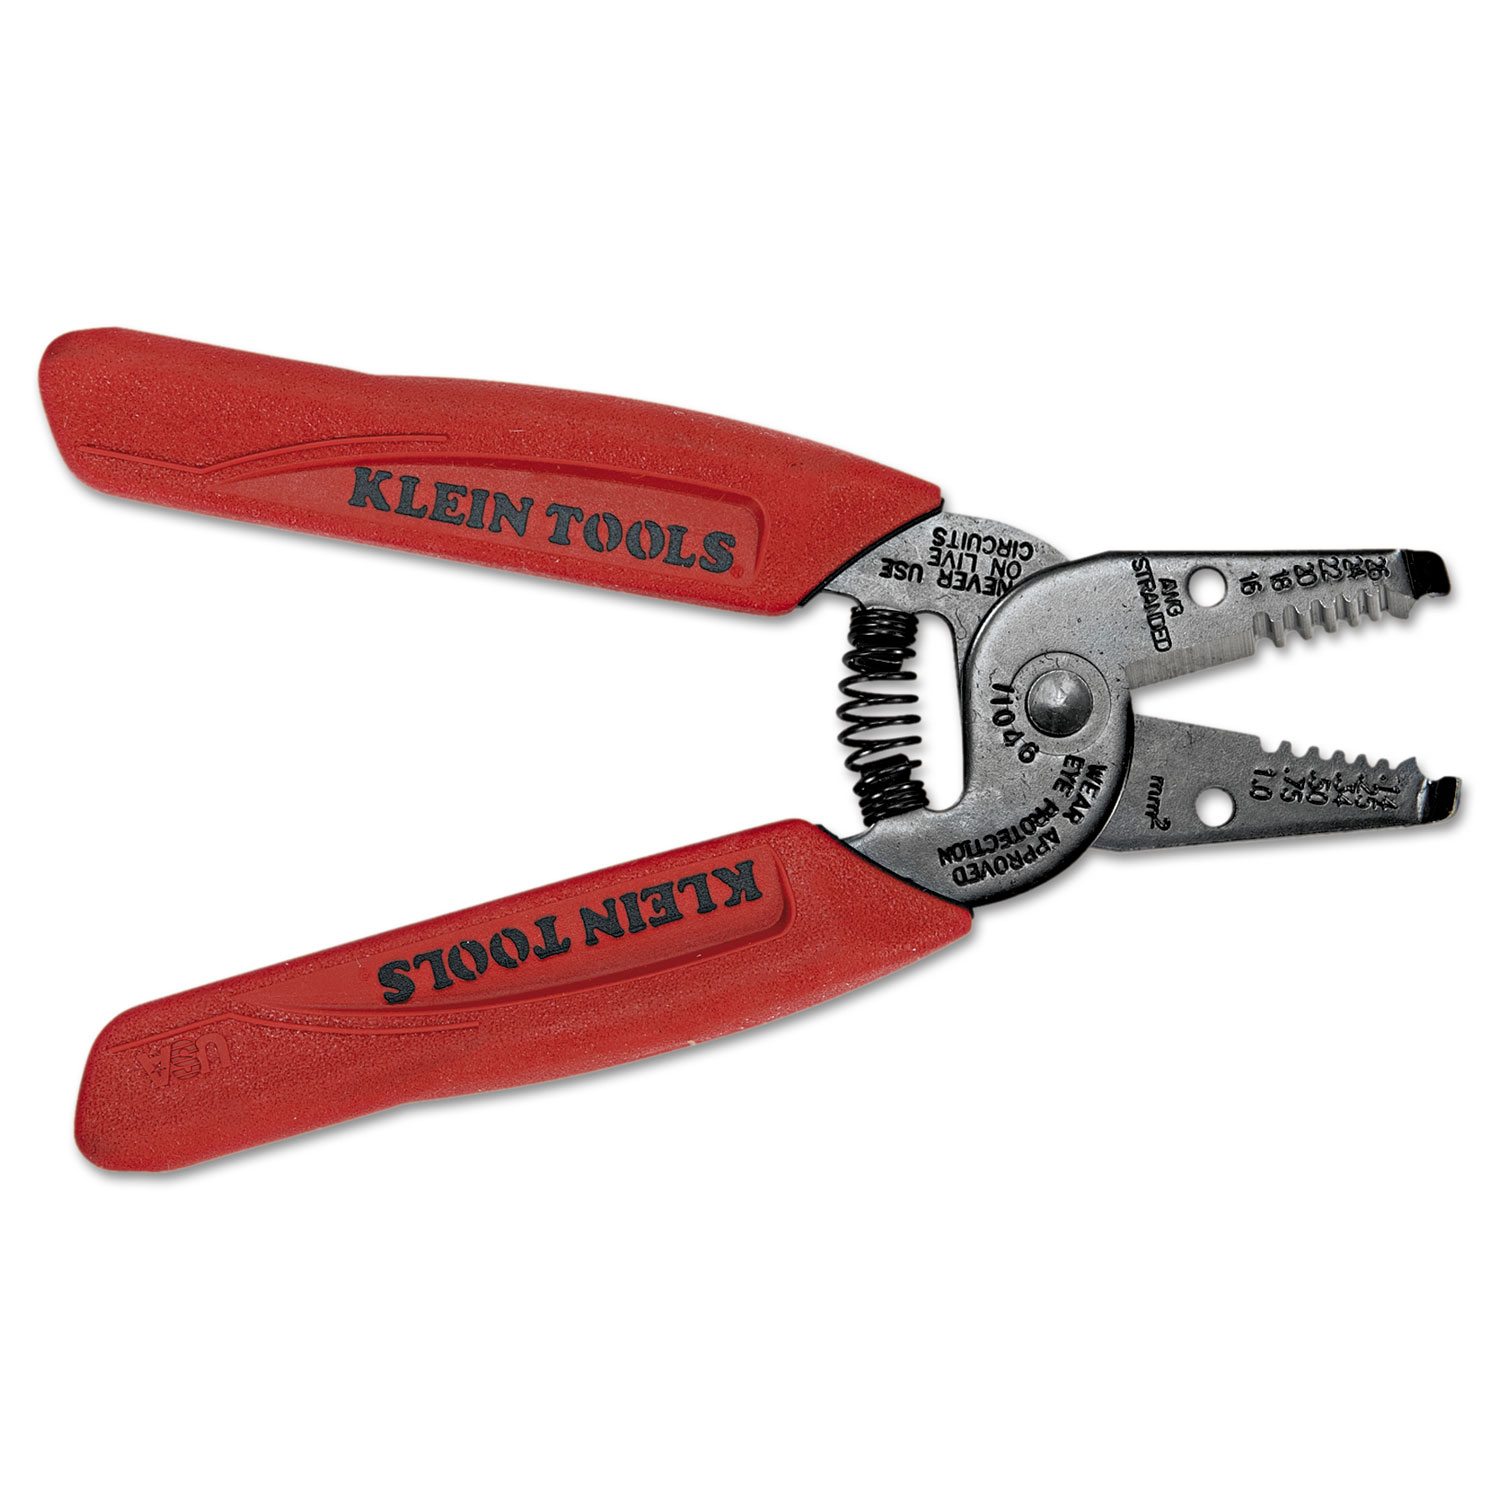 Wire Stripper/Cutter, 16-26 AWG, 6 1/4 Tool Length, Red Handle